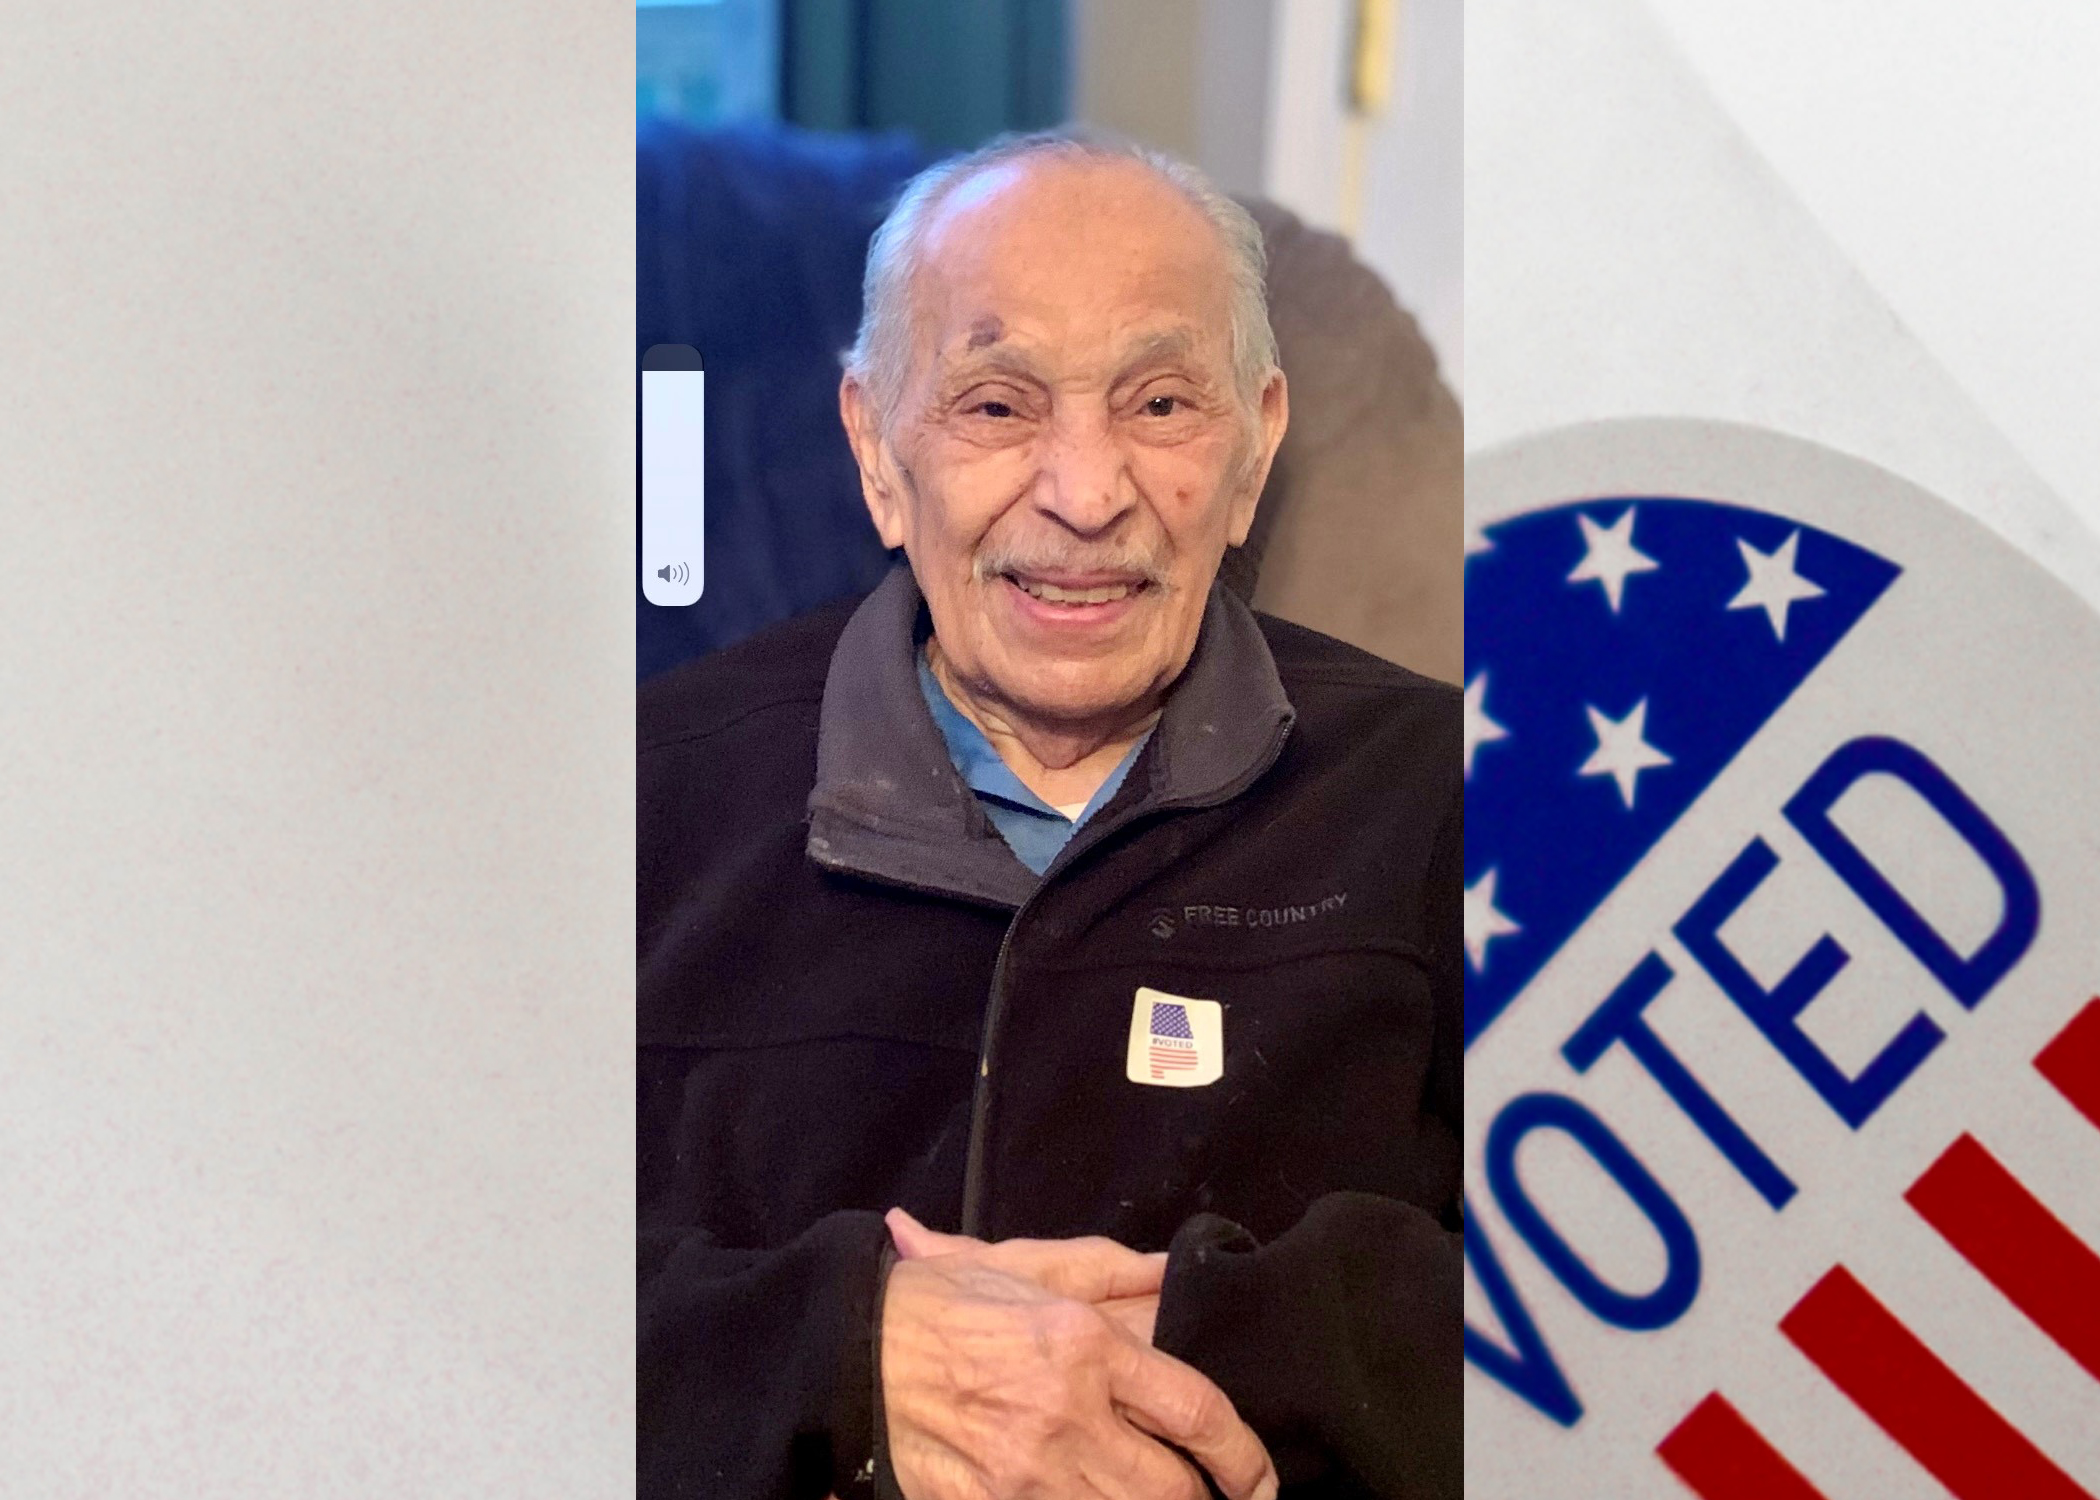 GOOD NEWS: 103-year-old man votes at precinct in St. Clair County